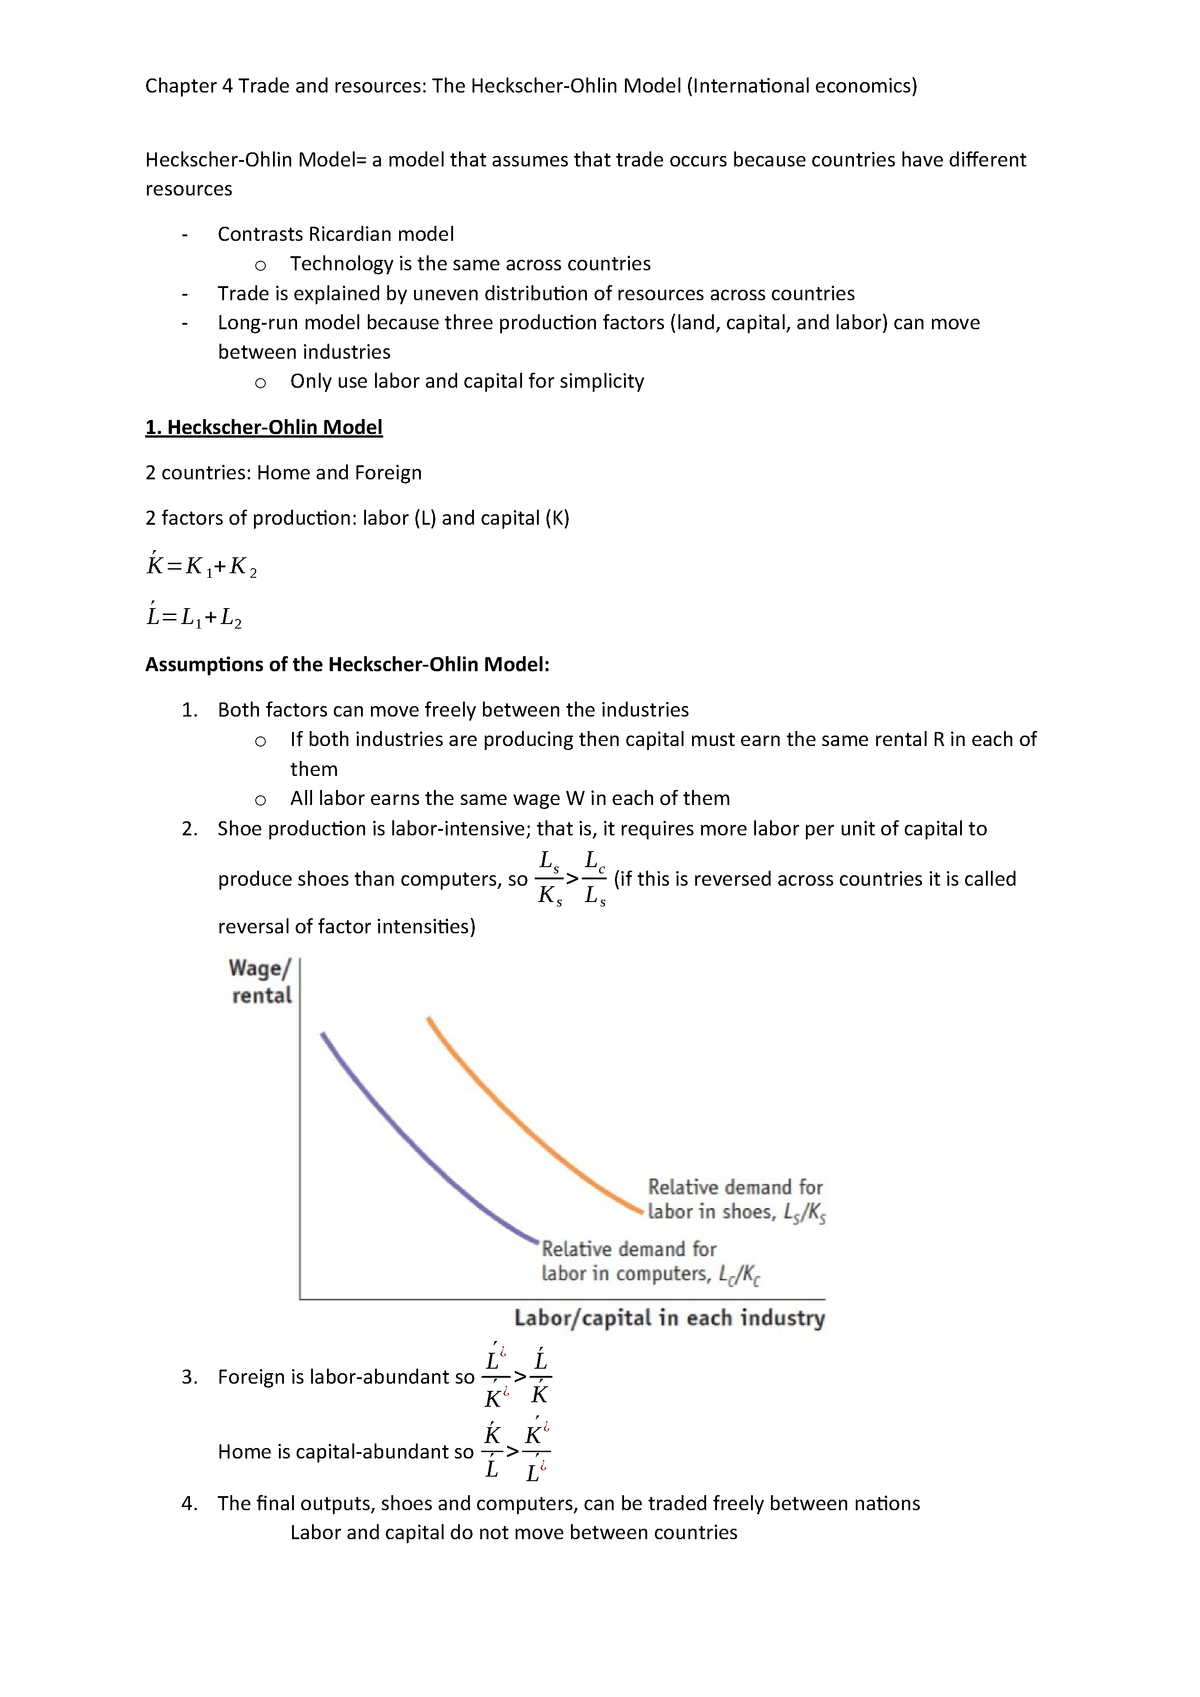 Chapter 4 Trade and Resources The HeckscherOhlin Model StudeerSnel